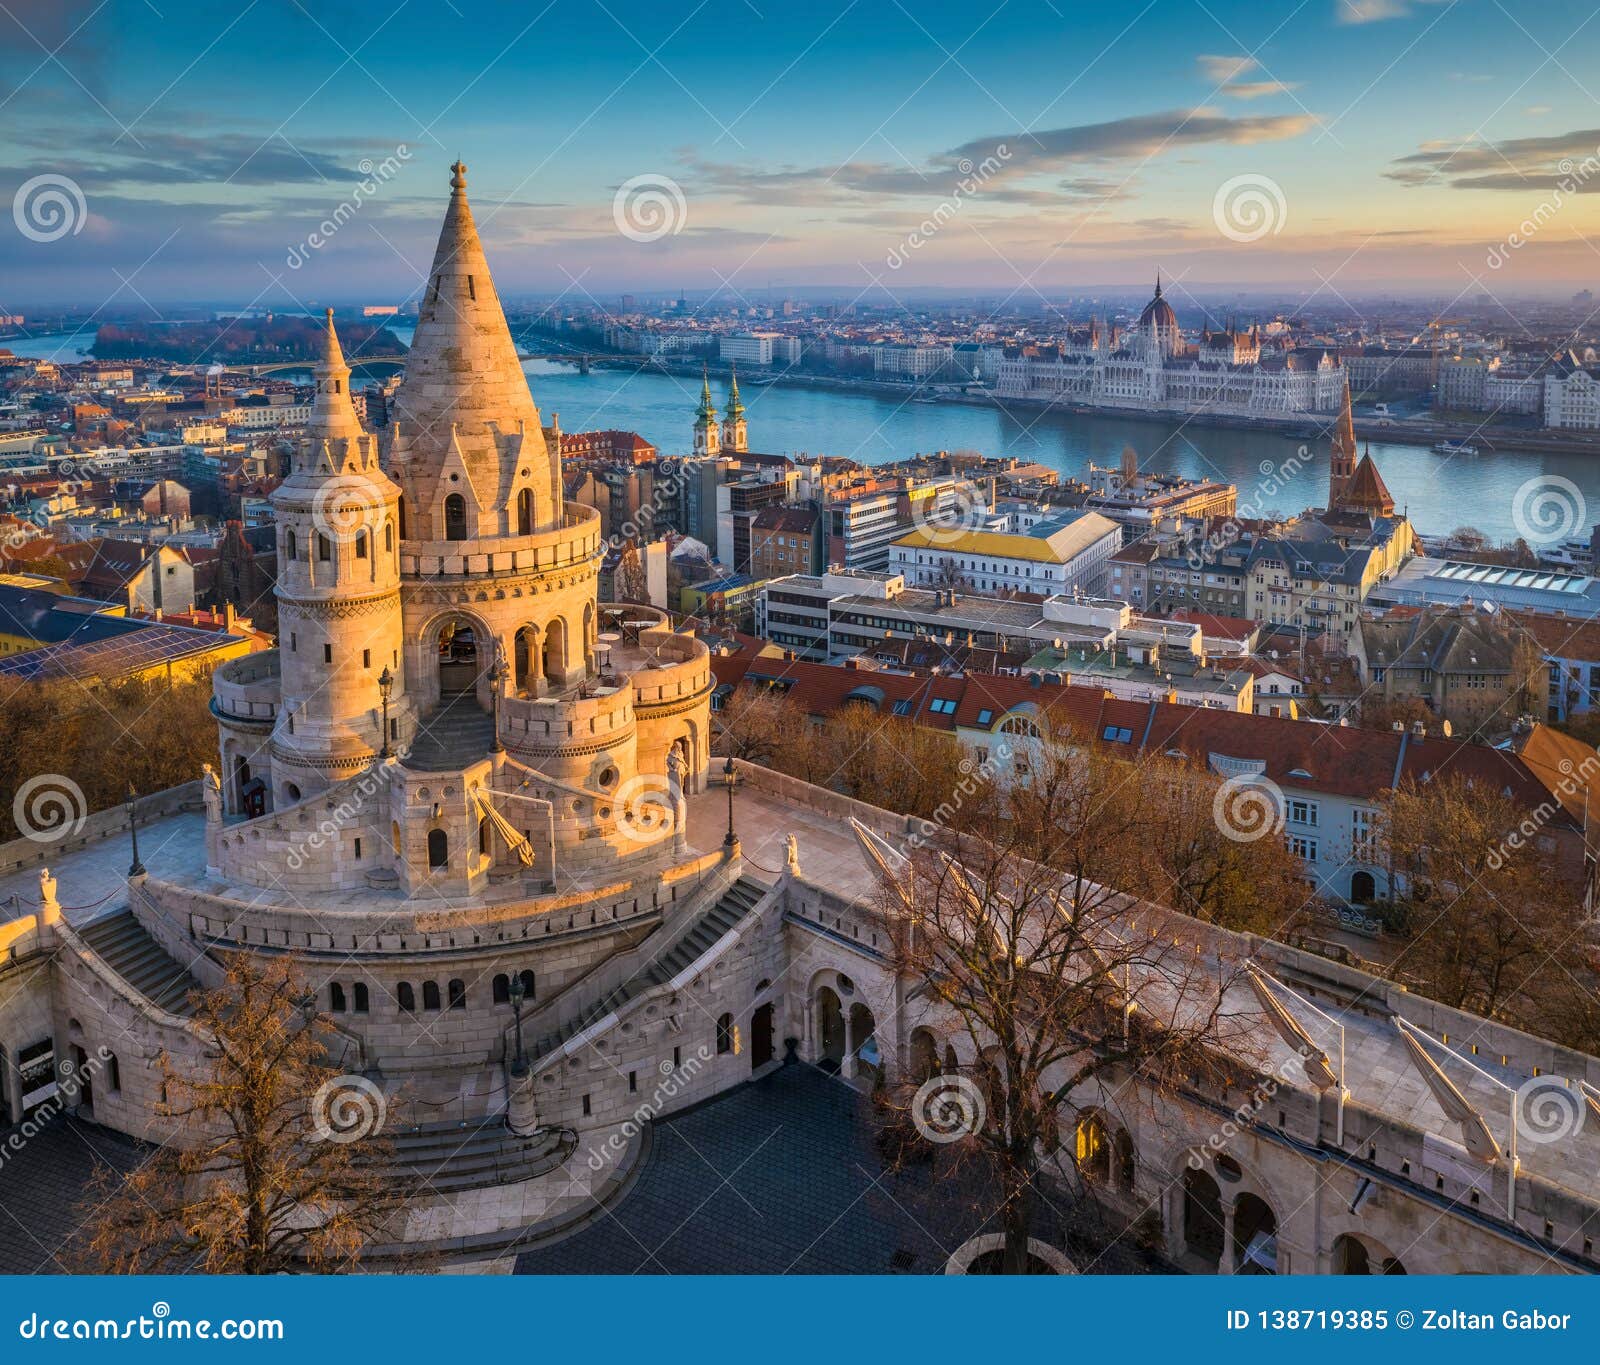 budapest, hungary - the main tower of the famous fisherman`s bastion halaszbastya from above